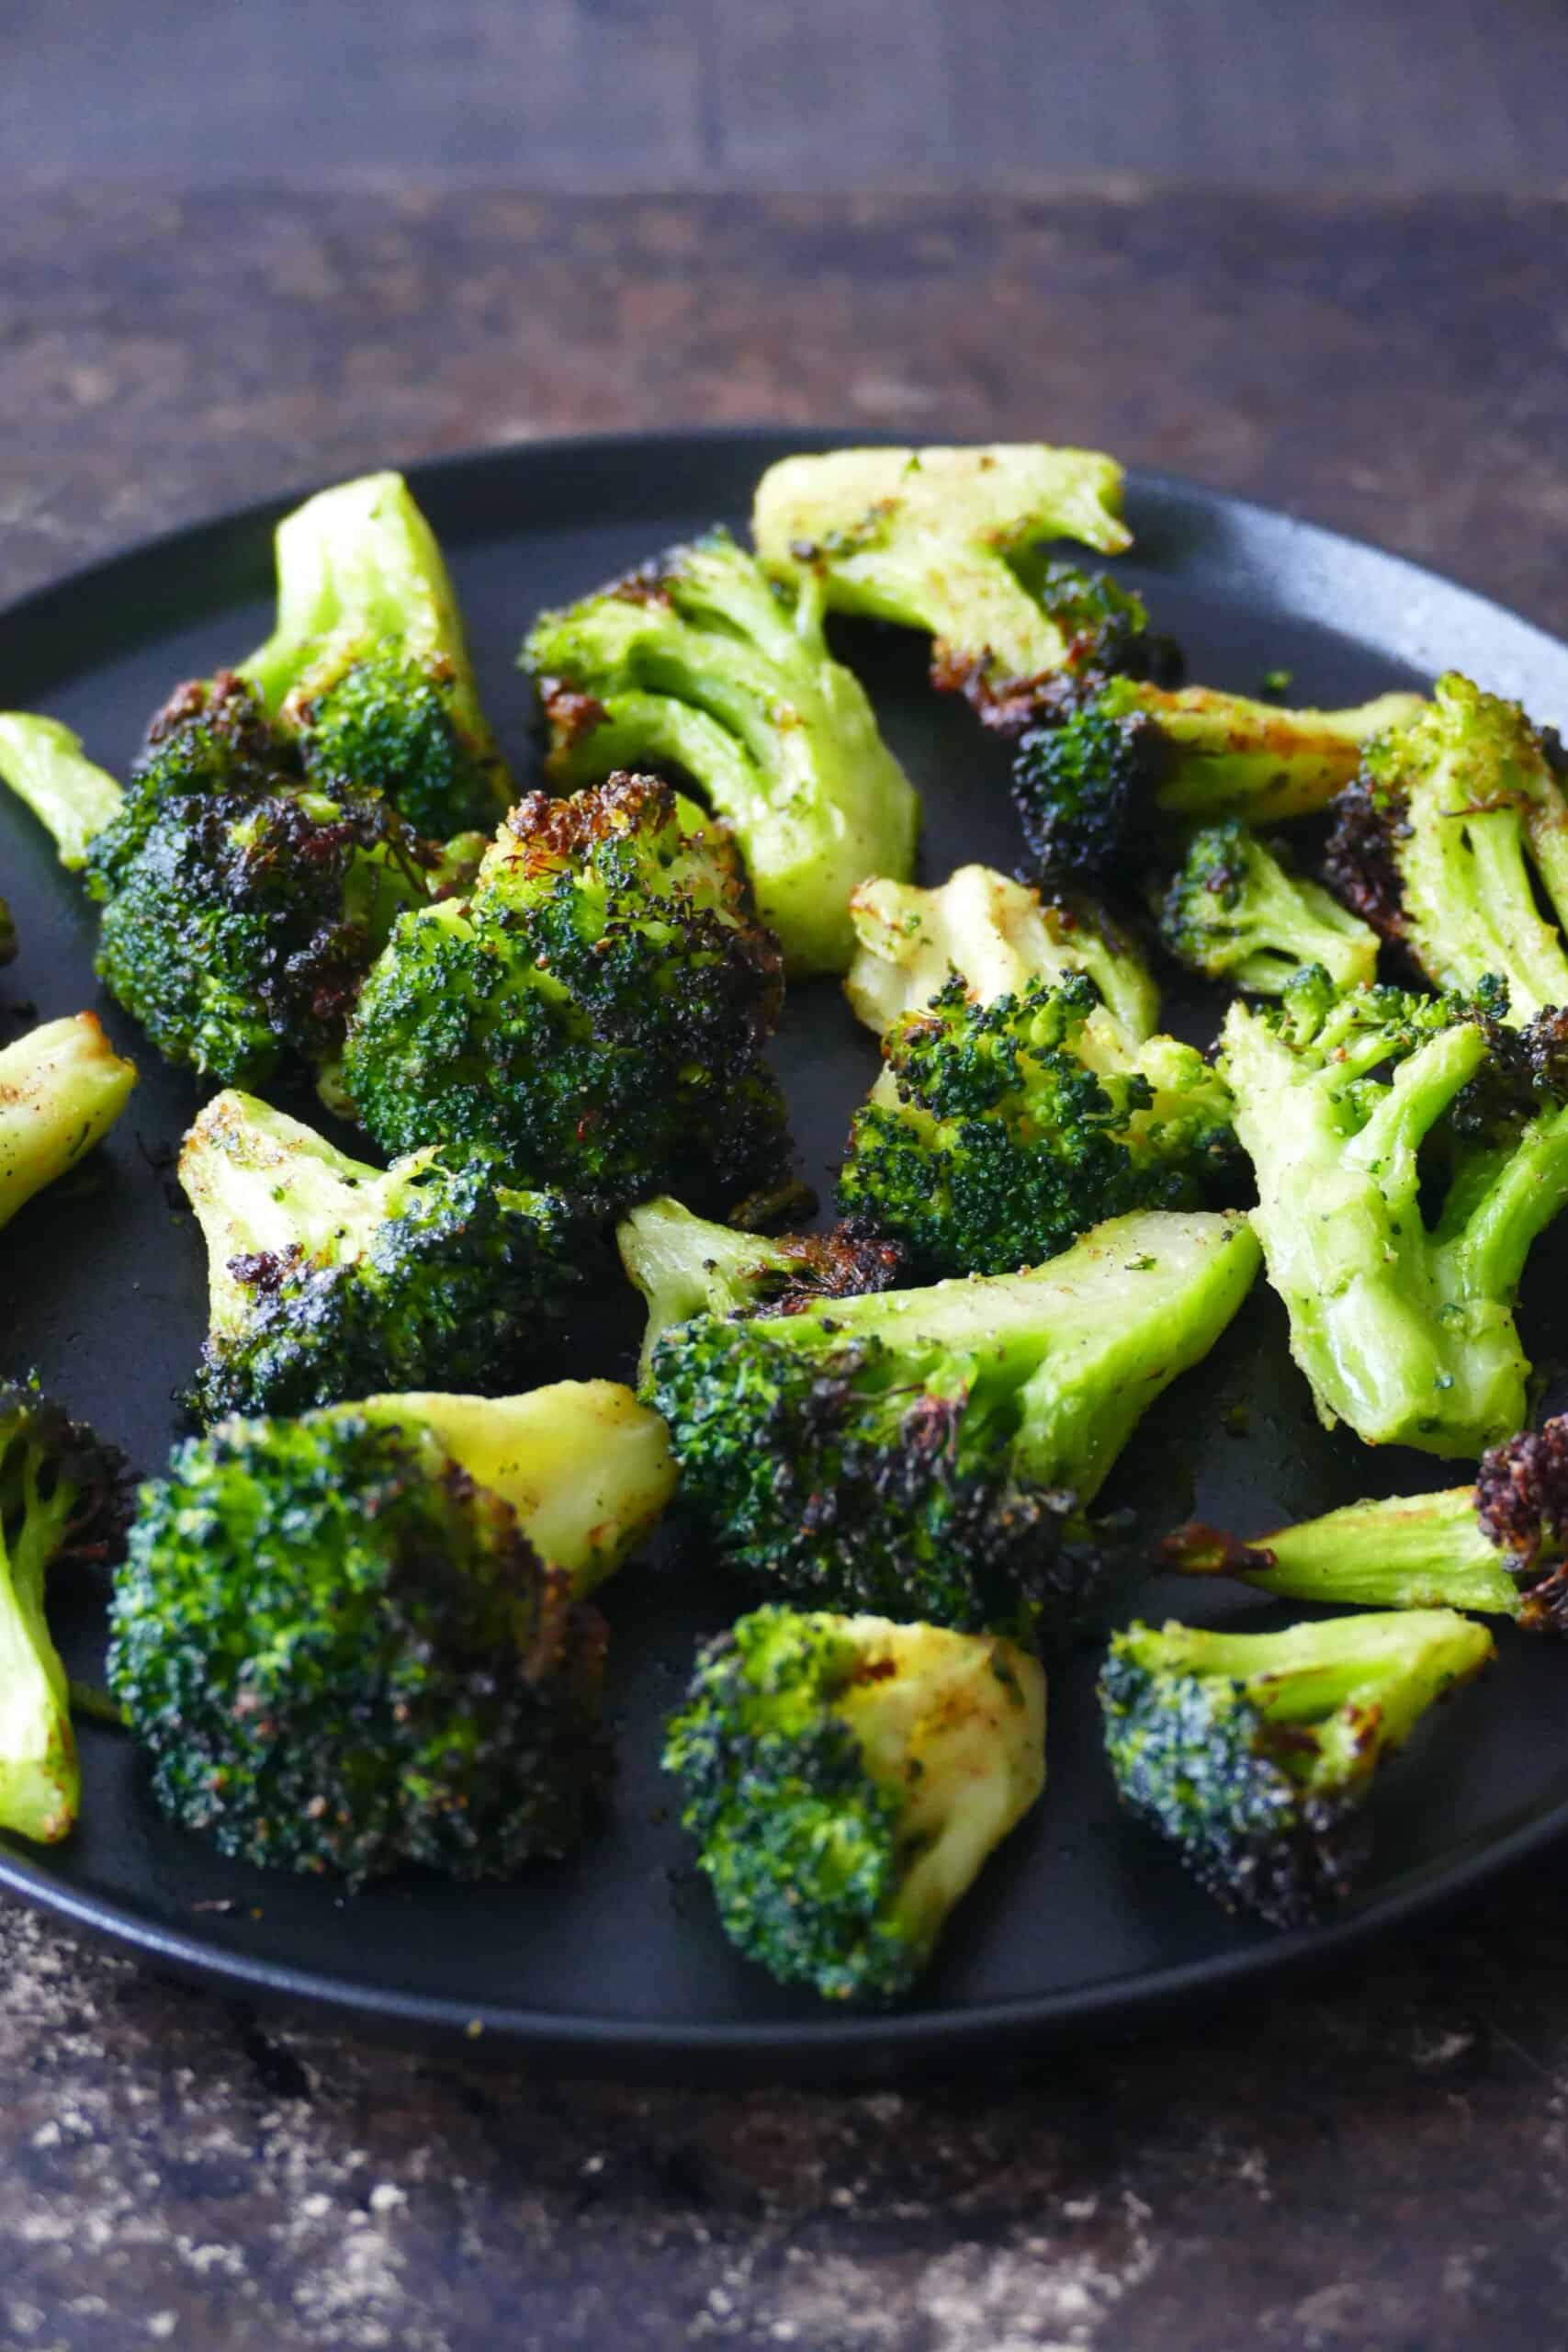 Black plate with slightly charred broccoli florets.